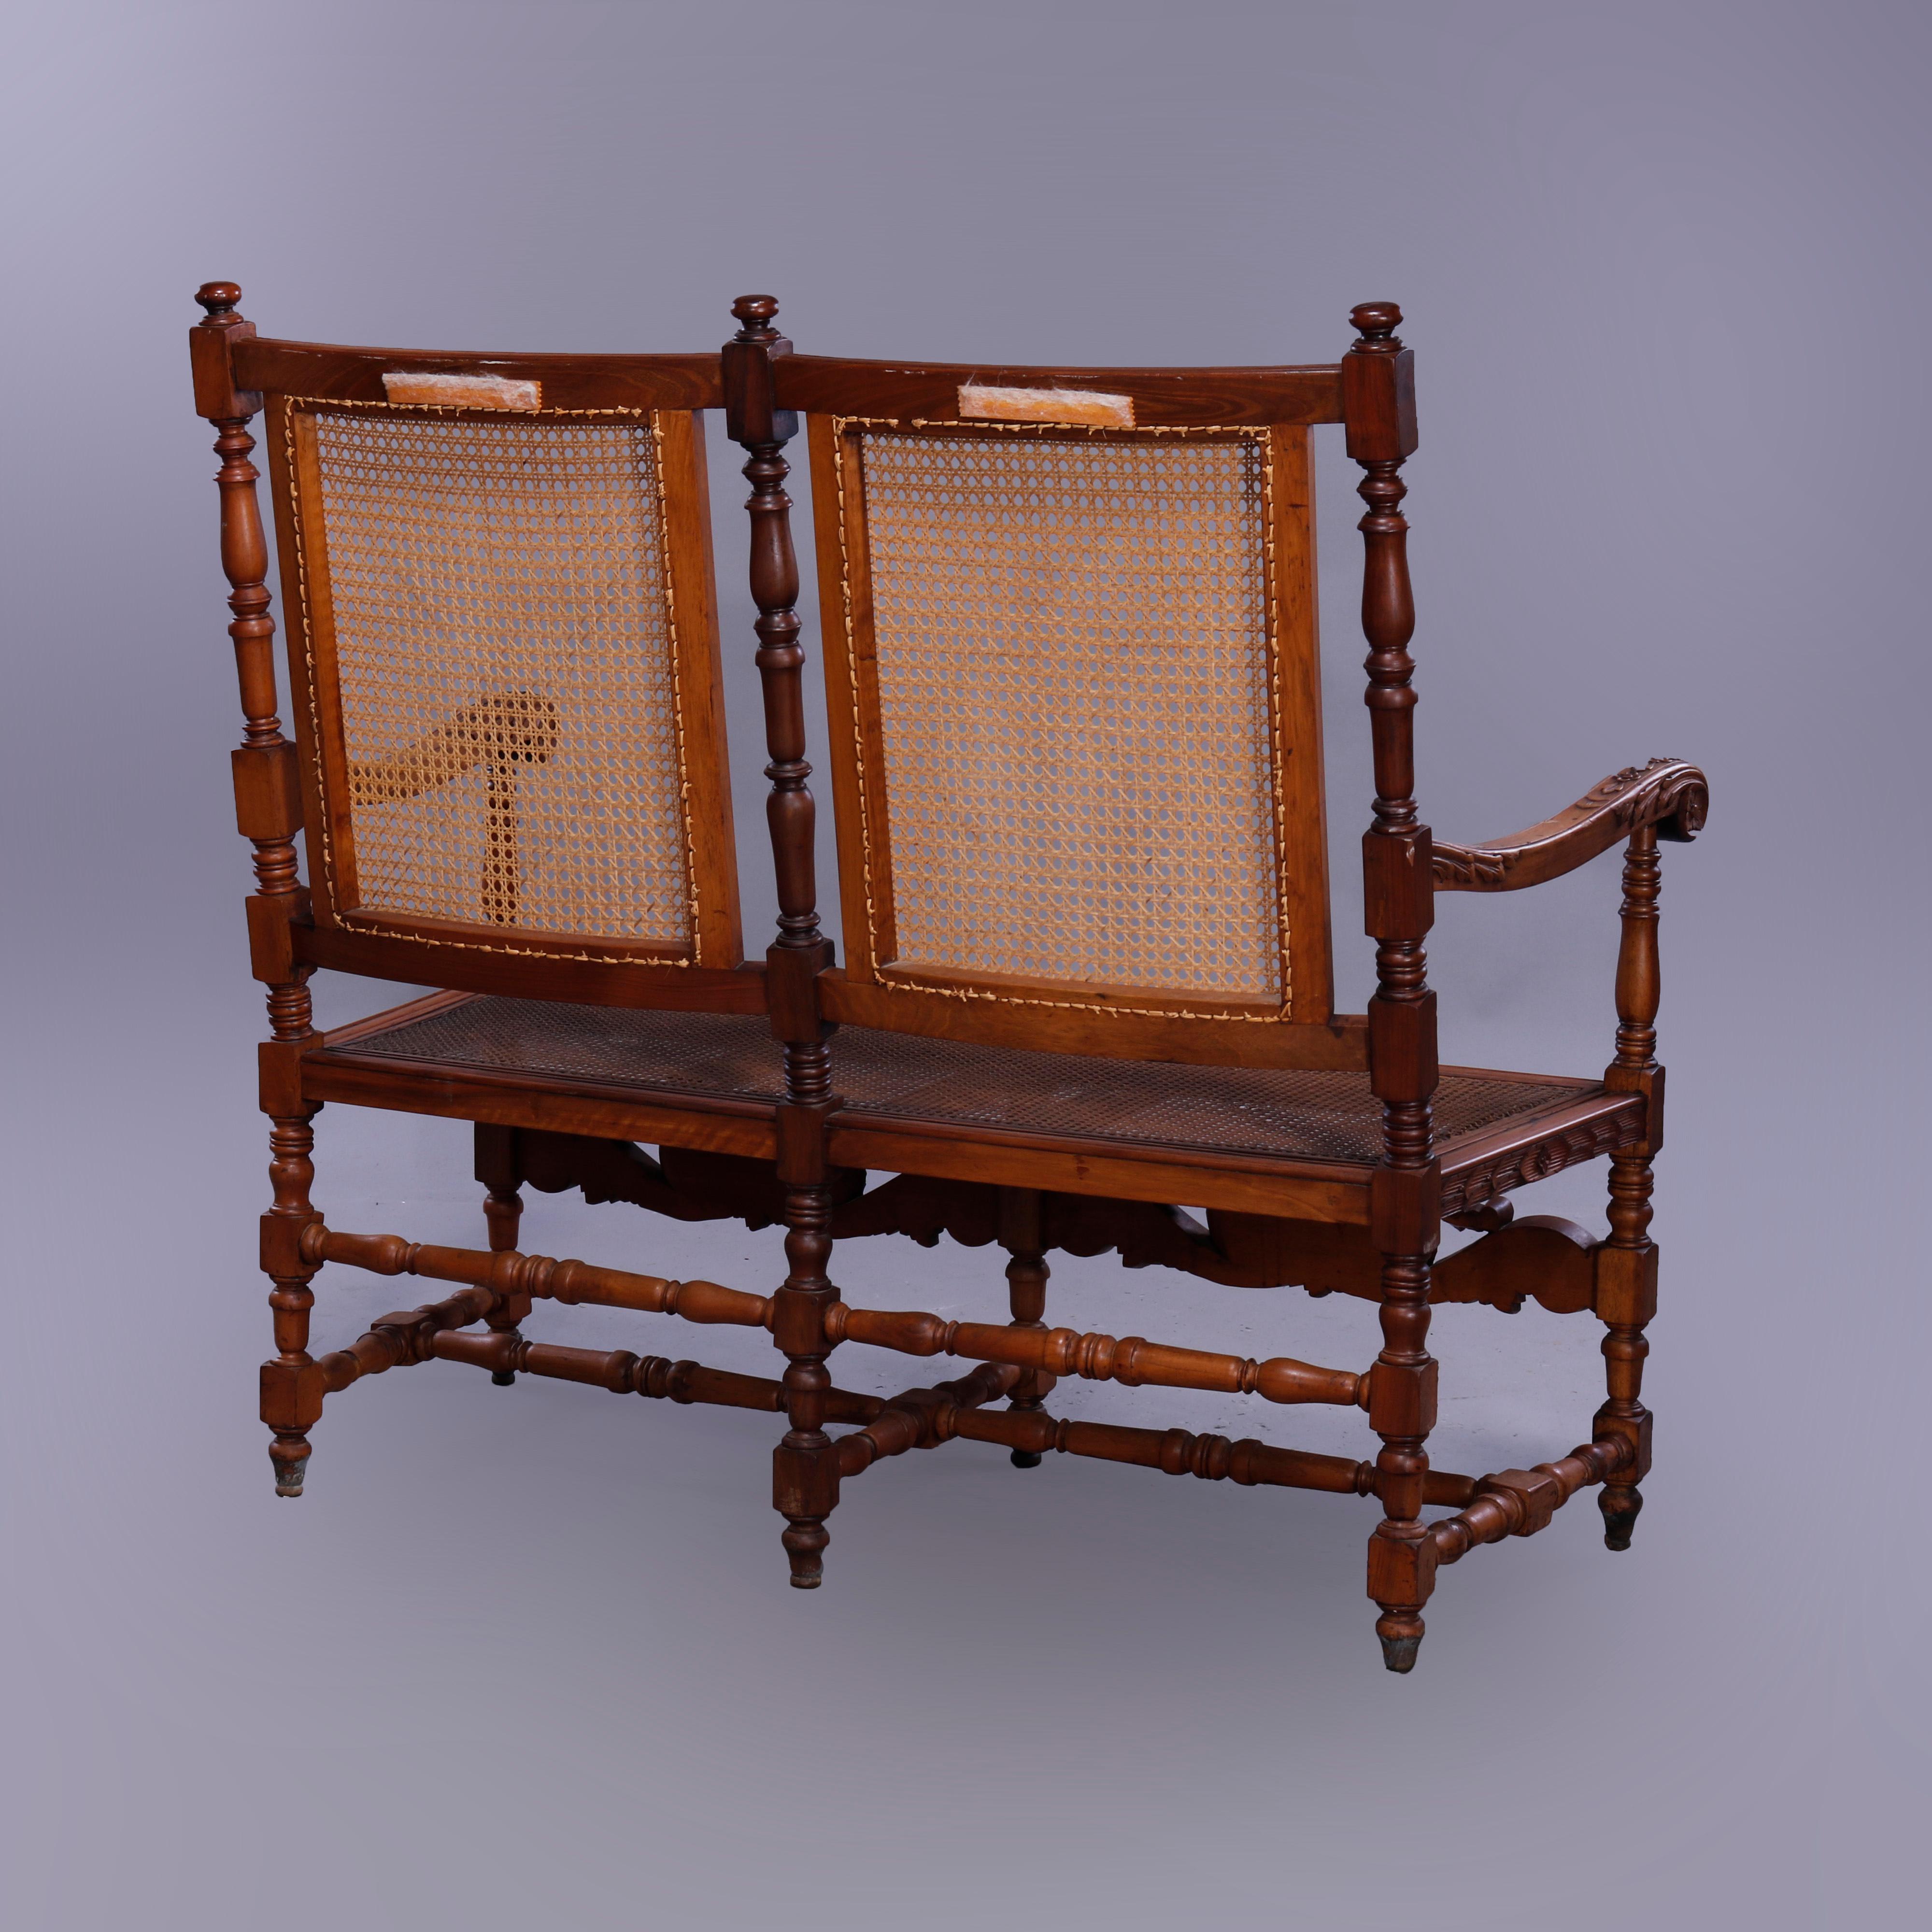 Woven Antique Continental Carved Walnut Edwardian Cane Bench, c1900